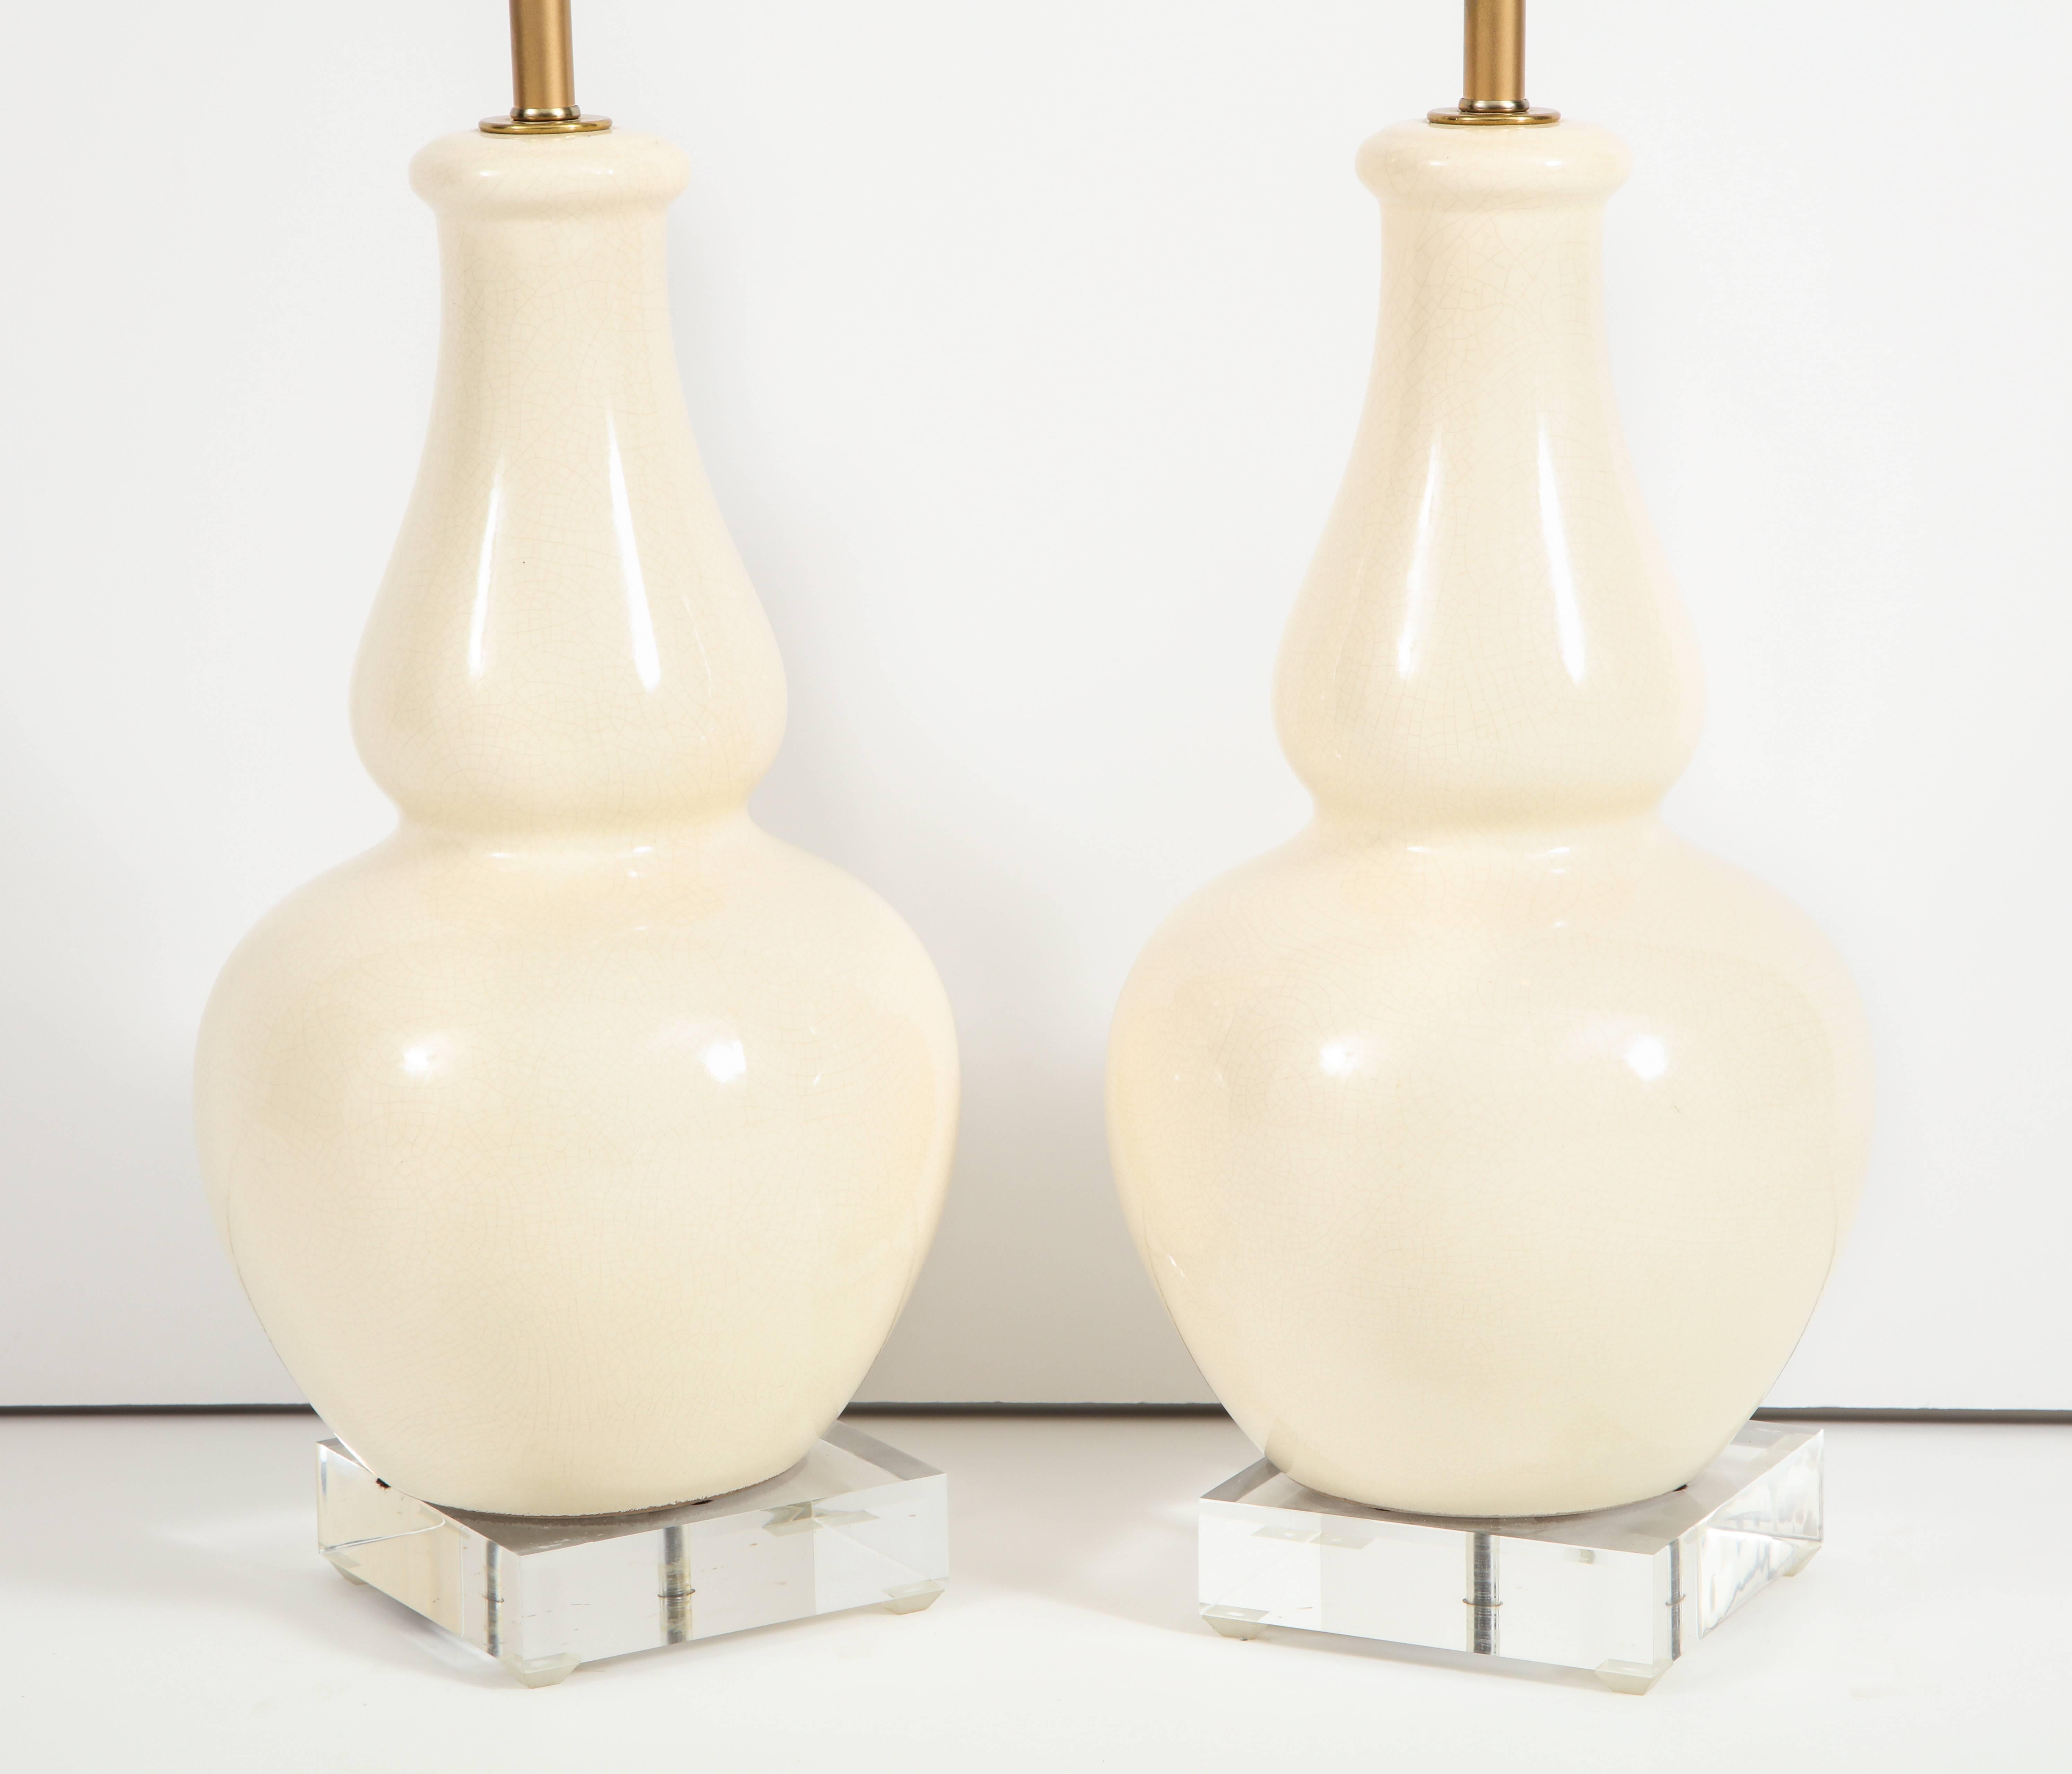 Italian Pair of Cream Glazed Gourd Vase Lamps with Lucite Square Base